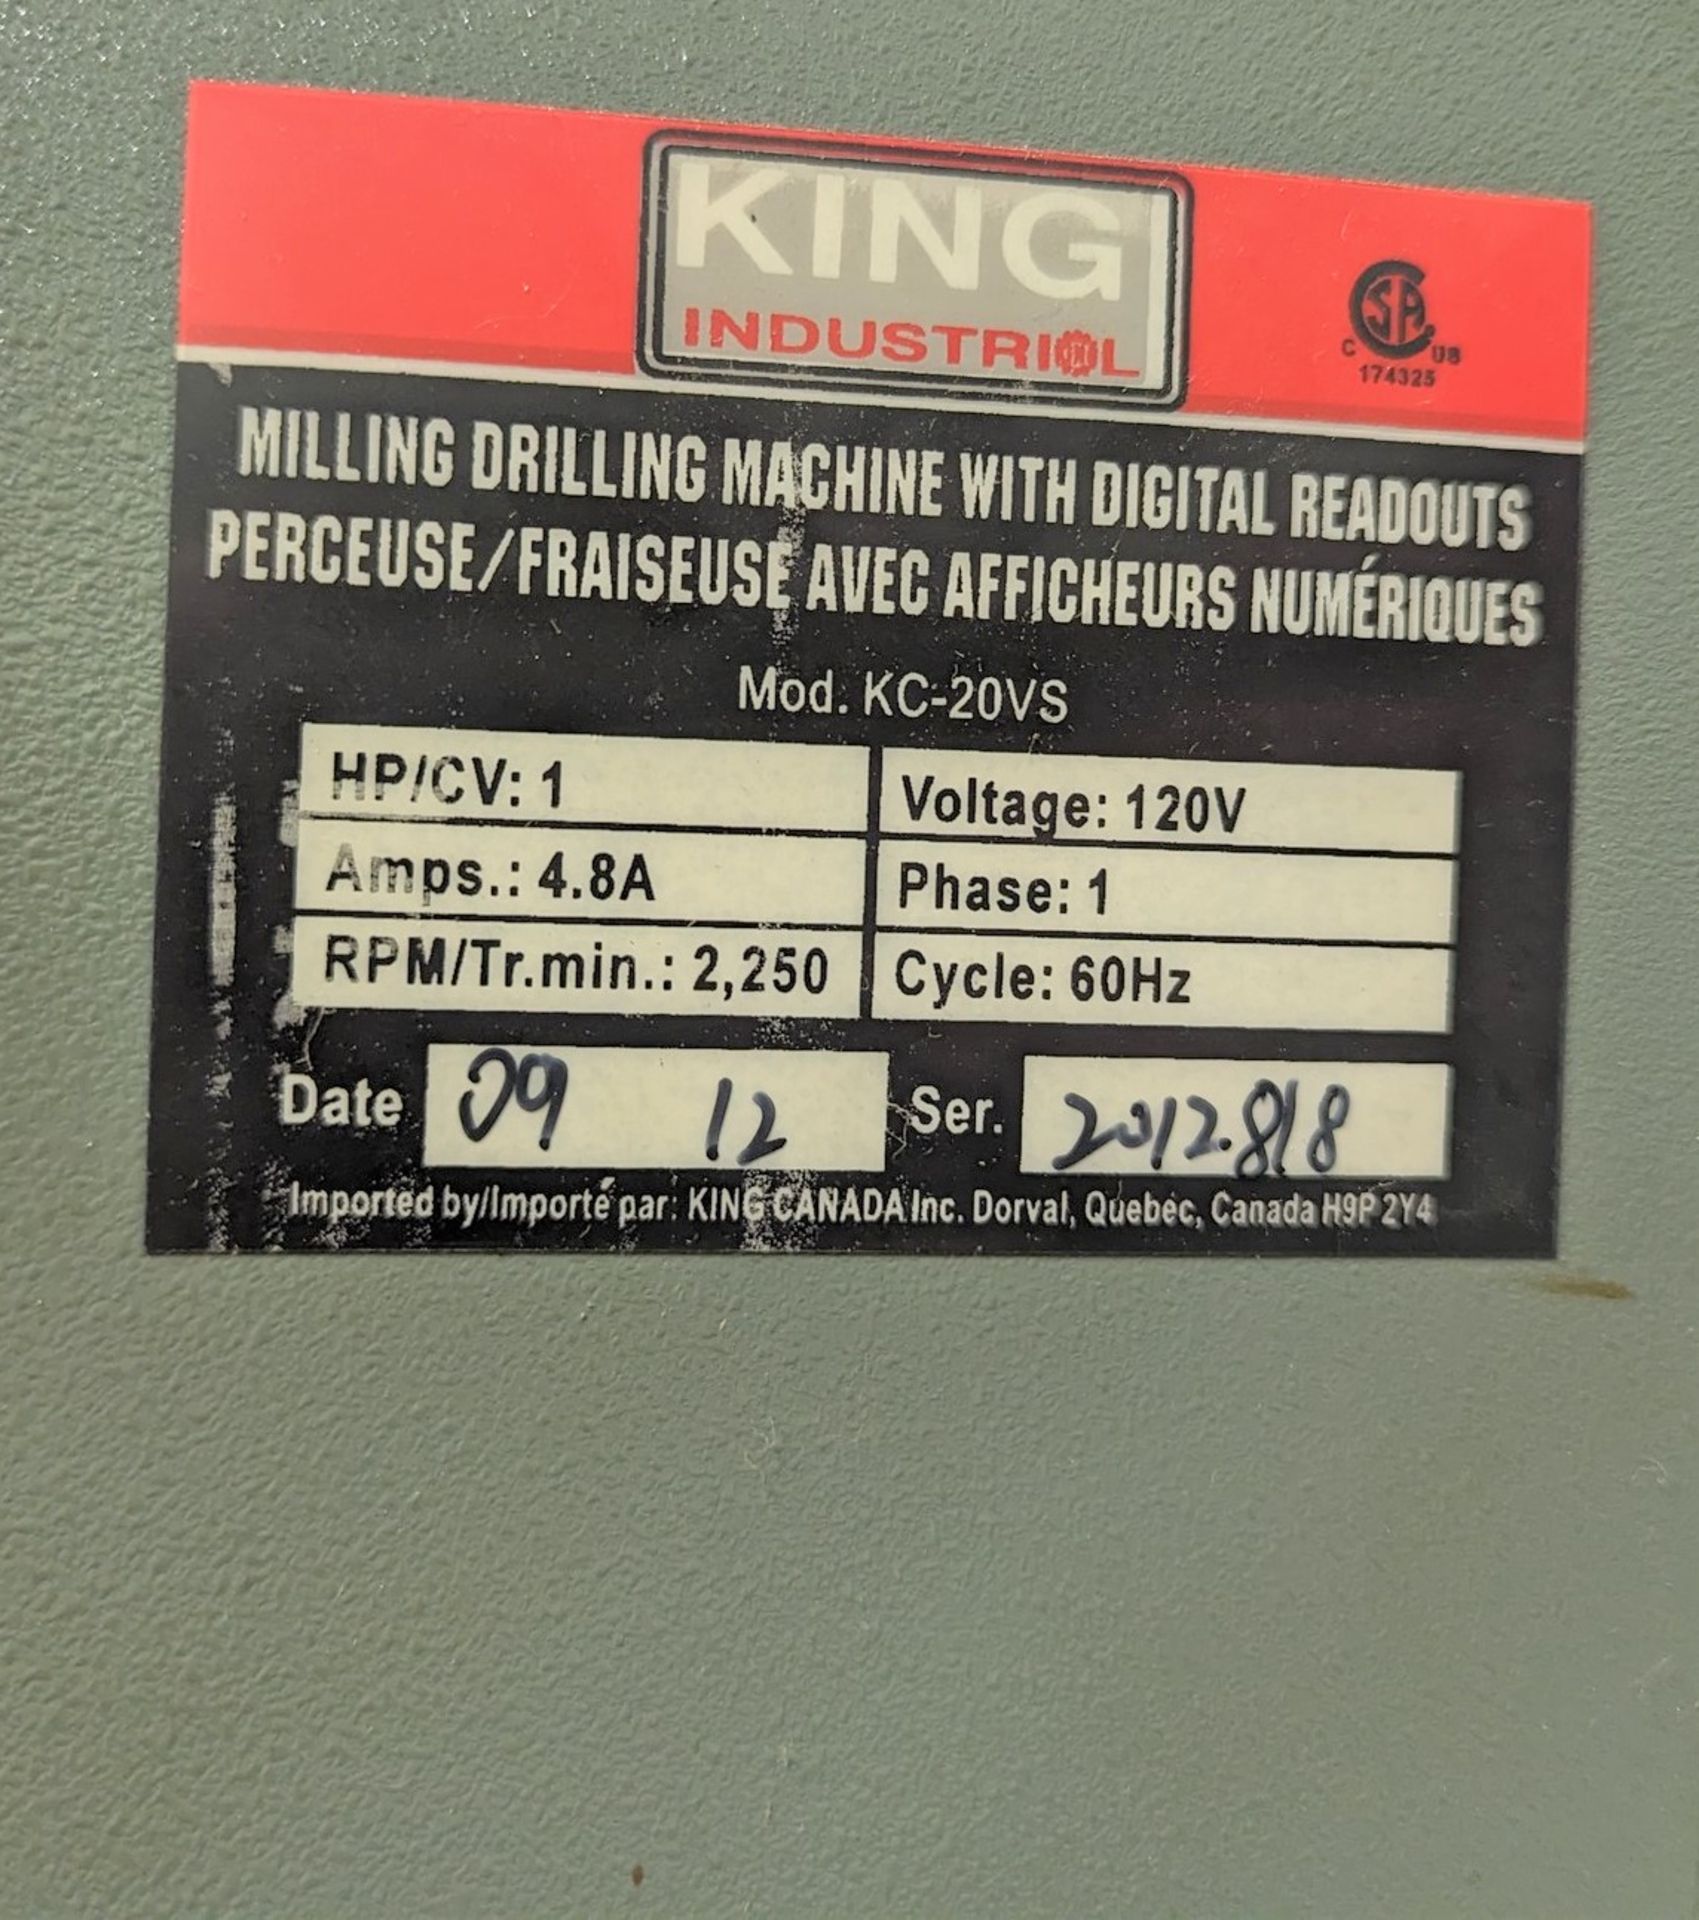 2012 KING INDUSTRIAL KC-20VS MILLING DRILLING MACHINE WITH DIGITAL READOUTS, S/N 0912 (RIGGING - Image 5 of 10